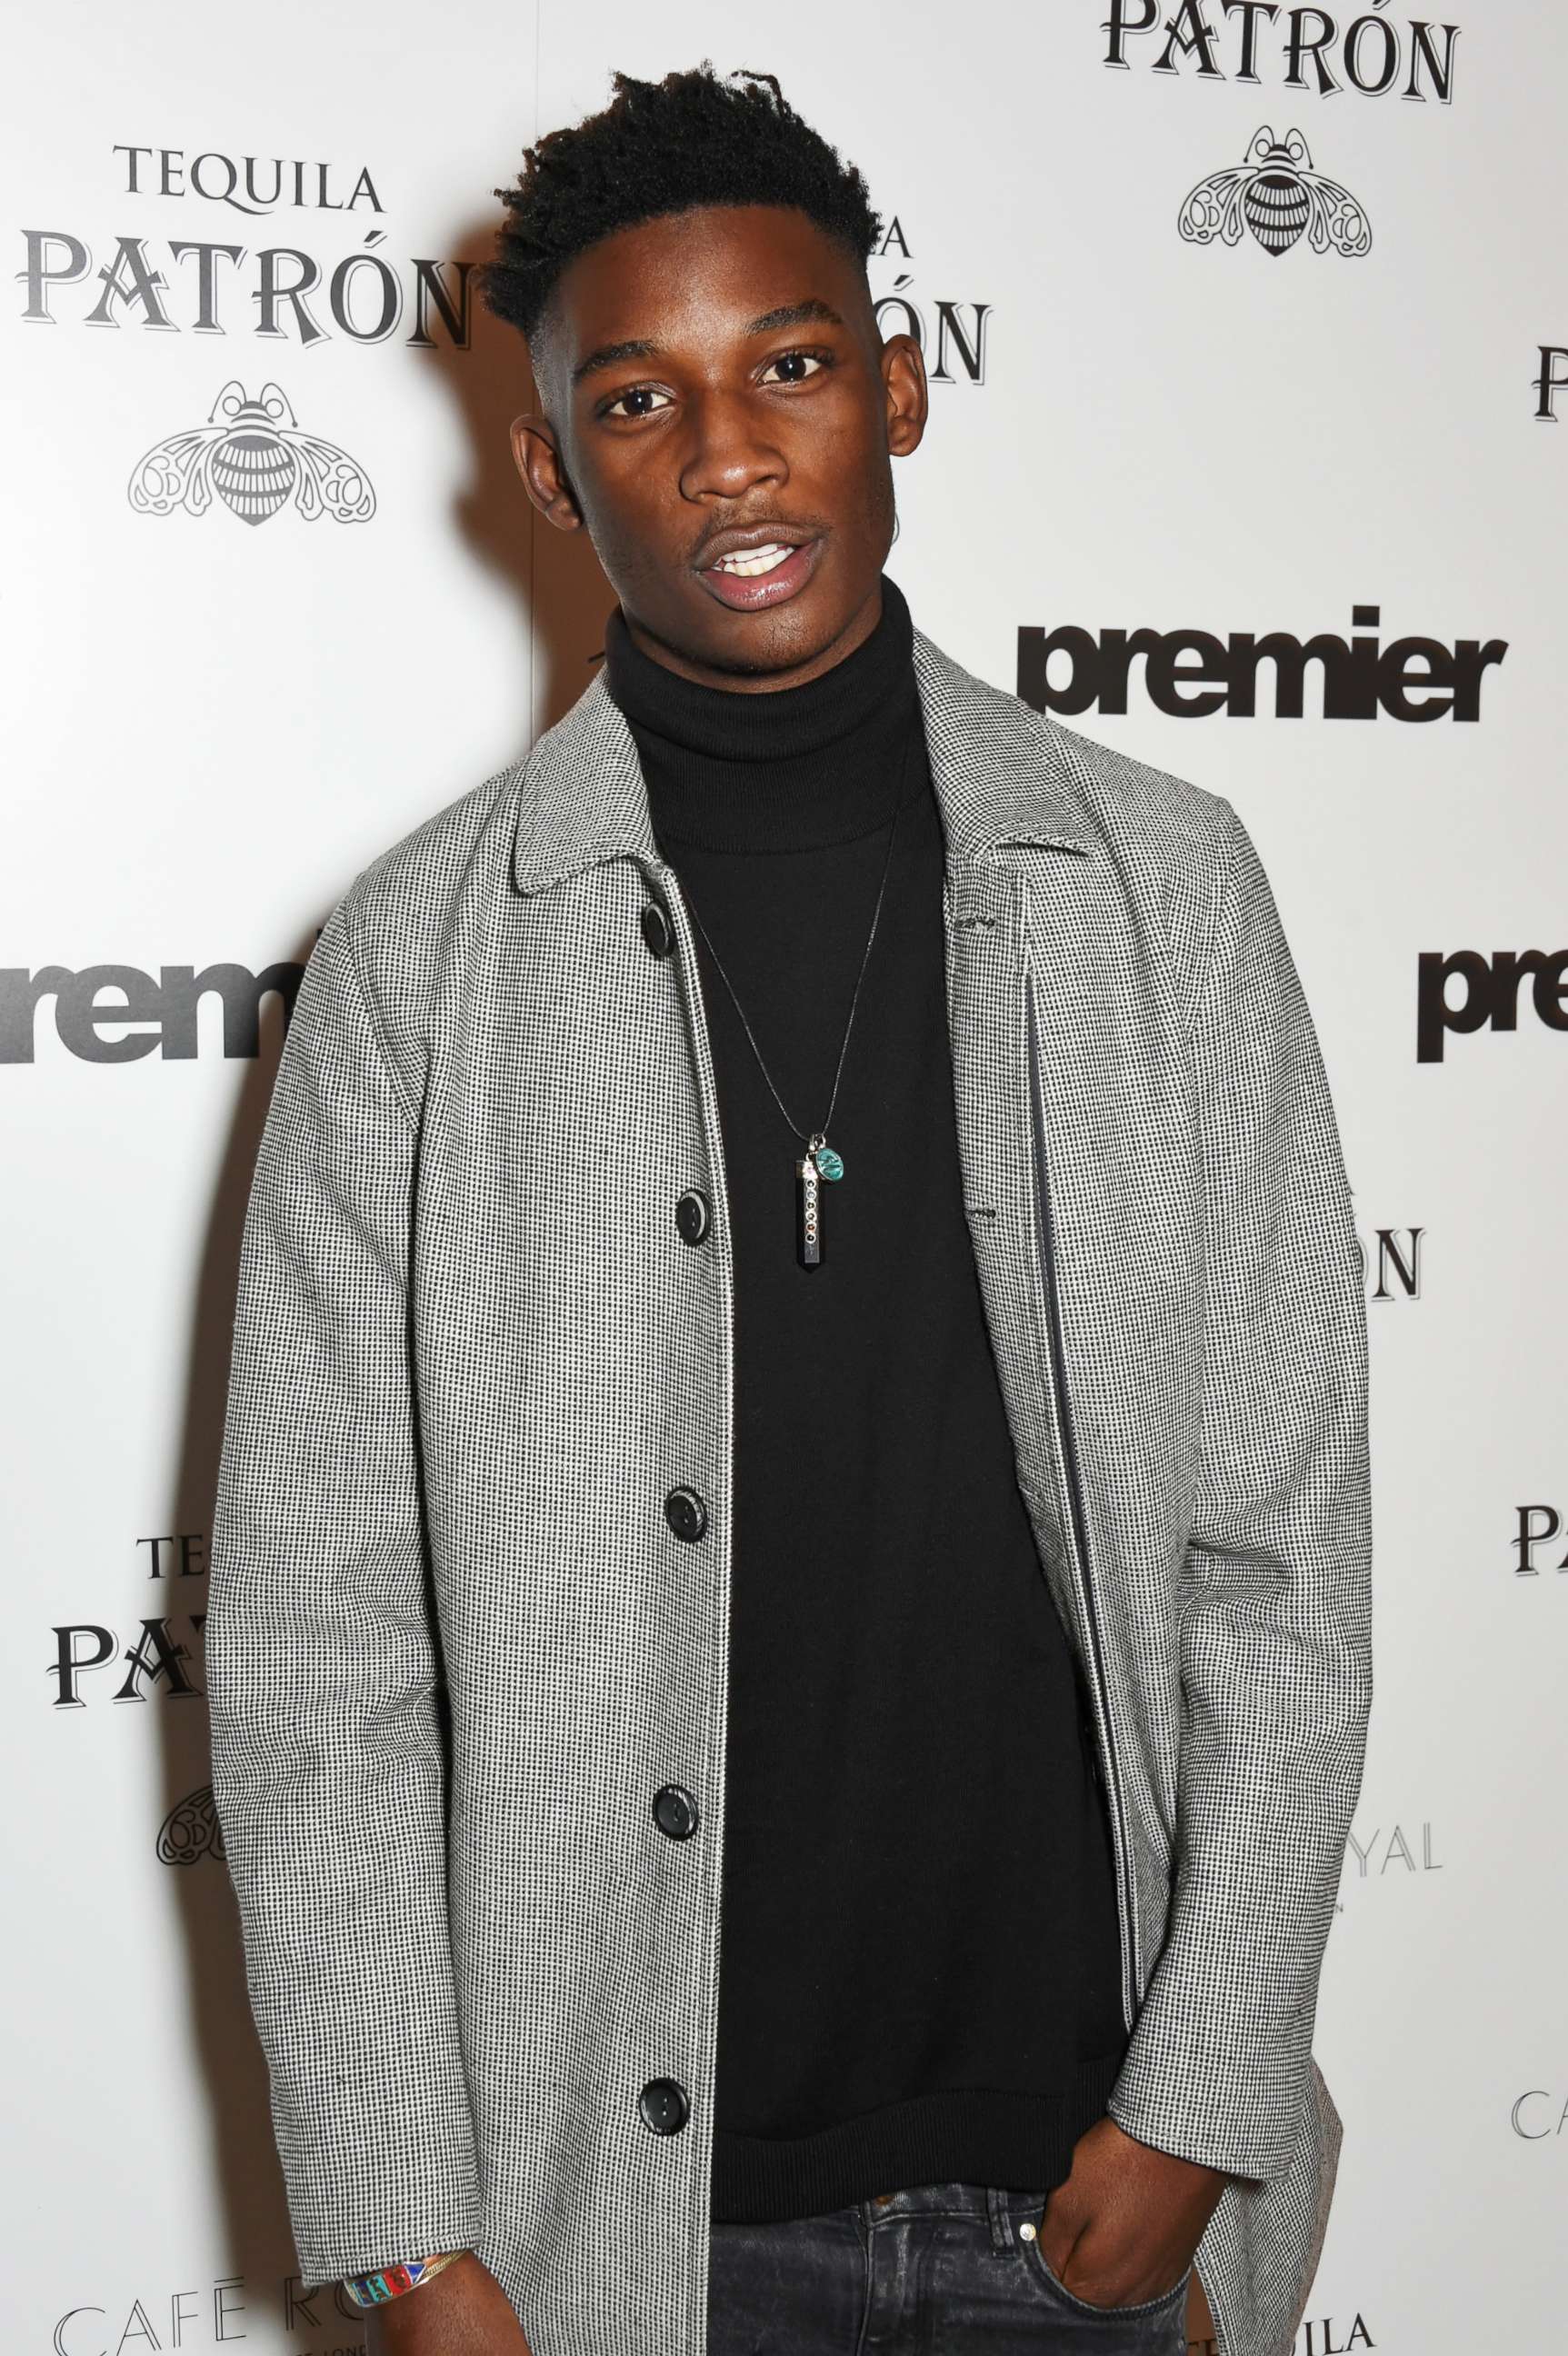 PHOTO: Harry Uzoka attends the launch of Premier Model Management founder Carole White's autobiography "Have I Said Too Much?: My Life In and Out of the Model Agency" at Cafe Royal, Feb. 18, 2015 in London.